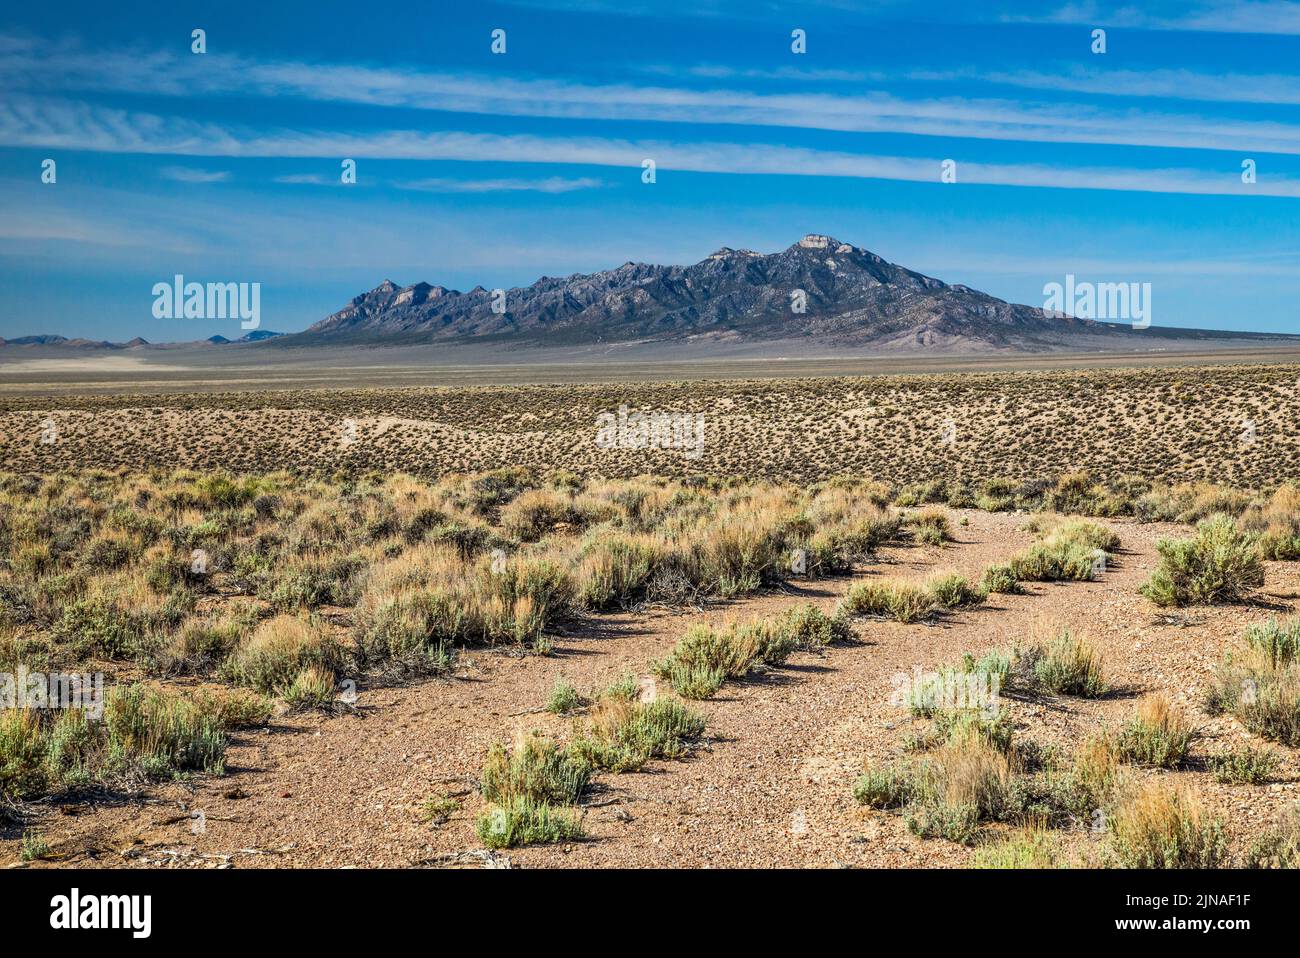 Worthington Mountains, dirt track in sagebrush desert, view from Coal Valley West Road, Great Basin Desert, Basin and Range National Monument, Nevada Stock Photo